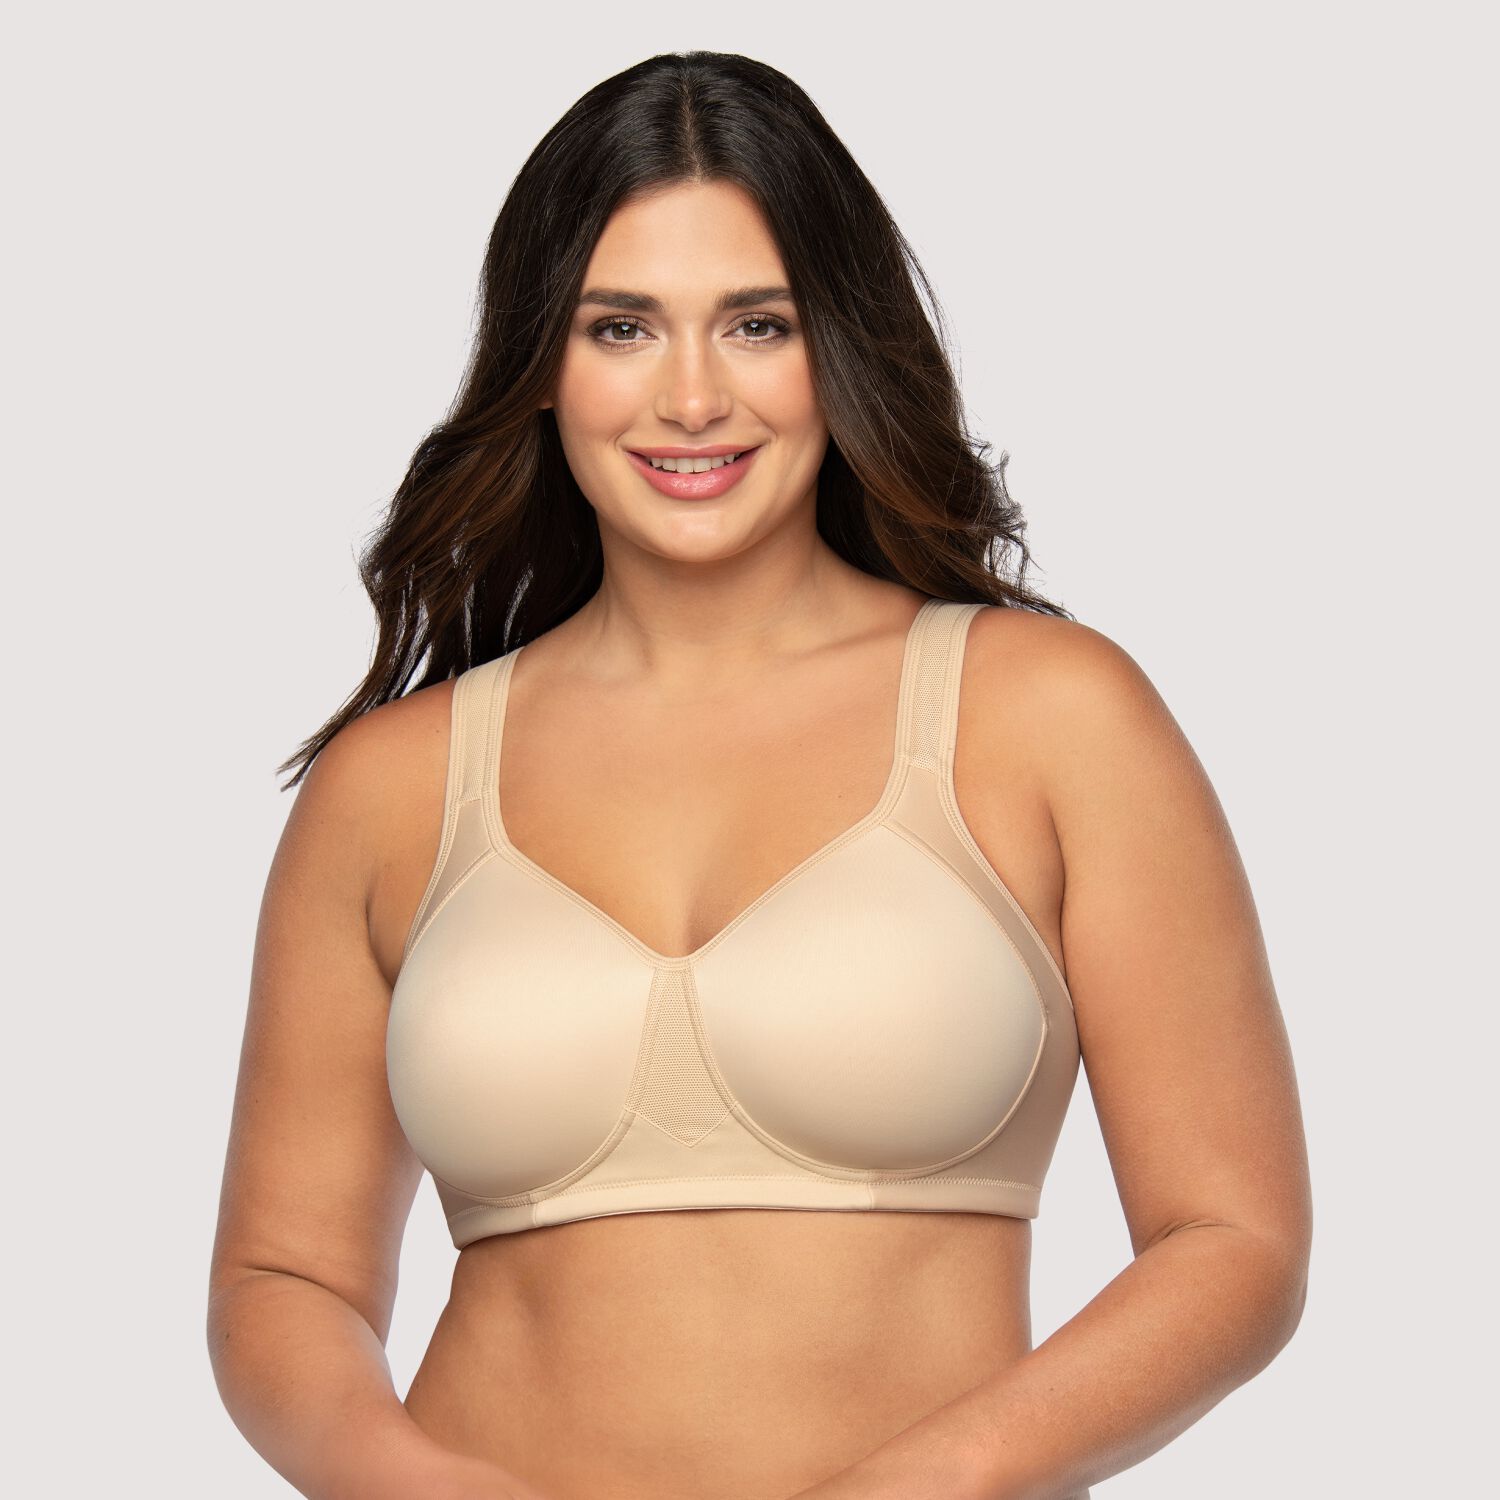 FitWell Comfort Bra Set Plus Size 3 pack, Ultimate Soft Plus Size